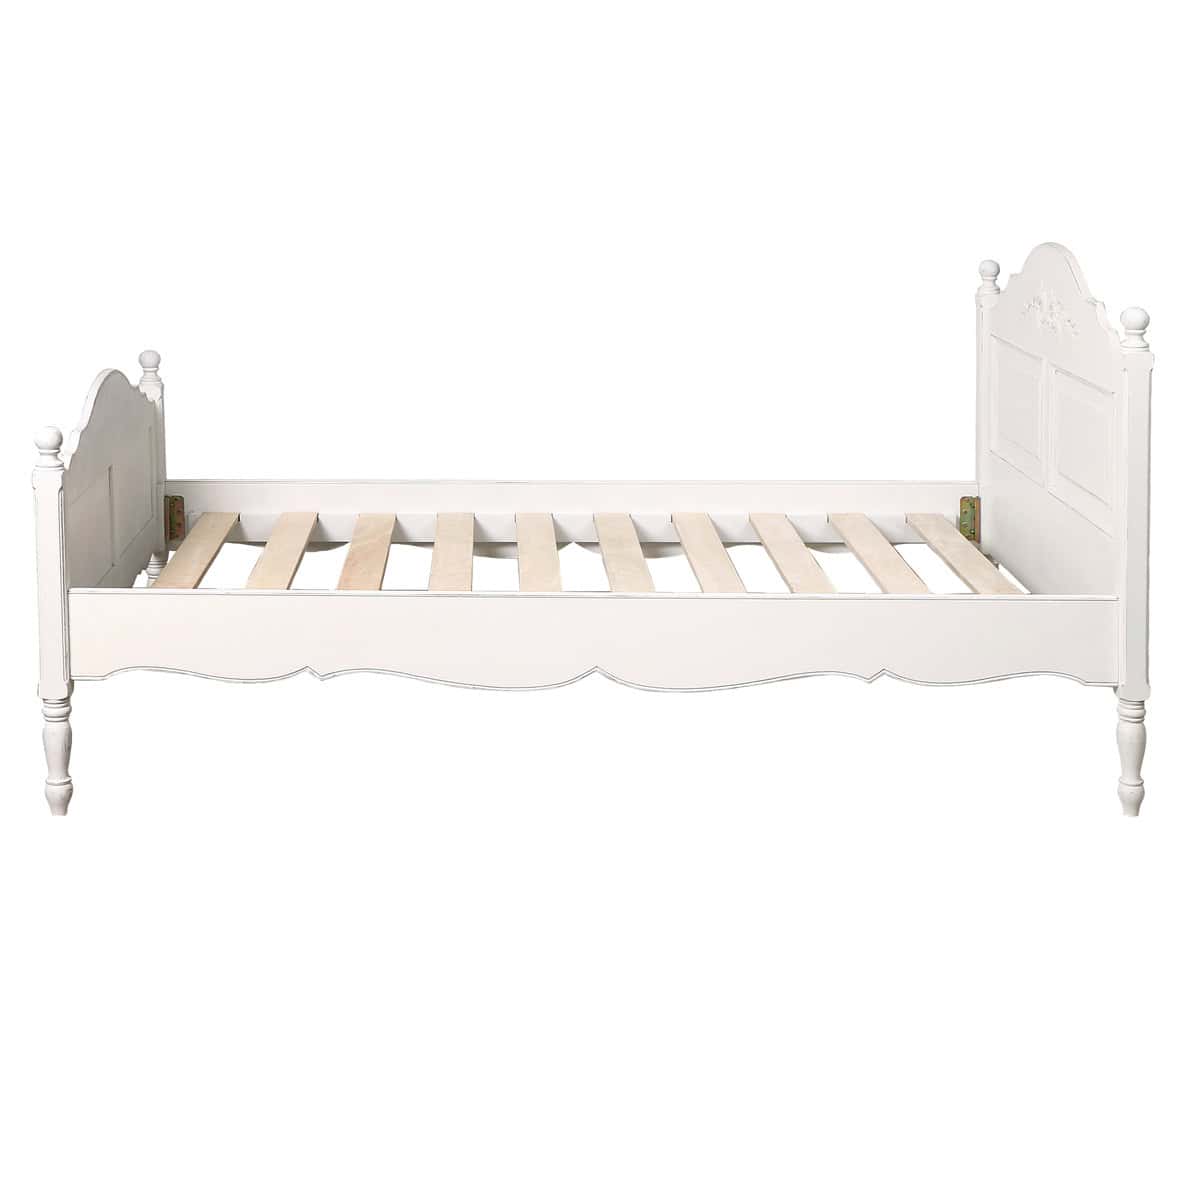 French King Single Bed Frame - Romance – Low-cost Delivery, Nationwide